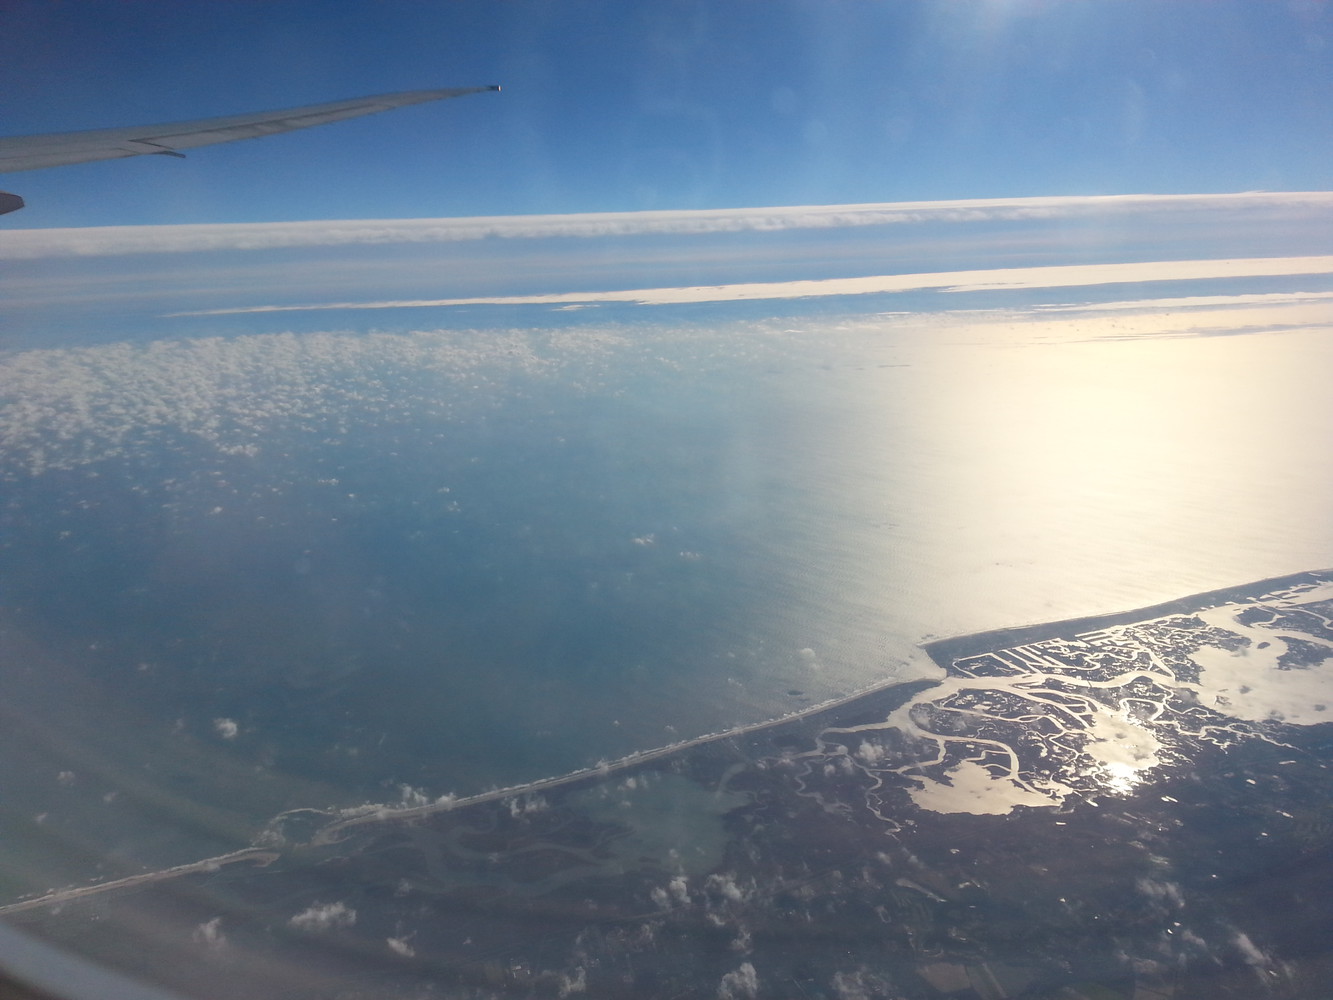 View of basin and sea from the window of an airplane